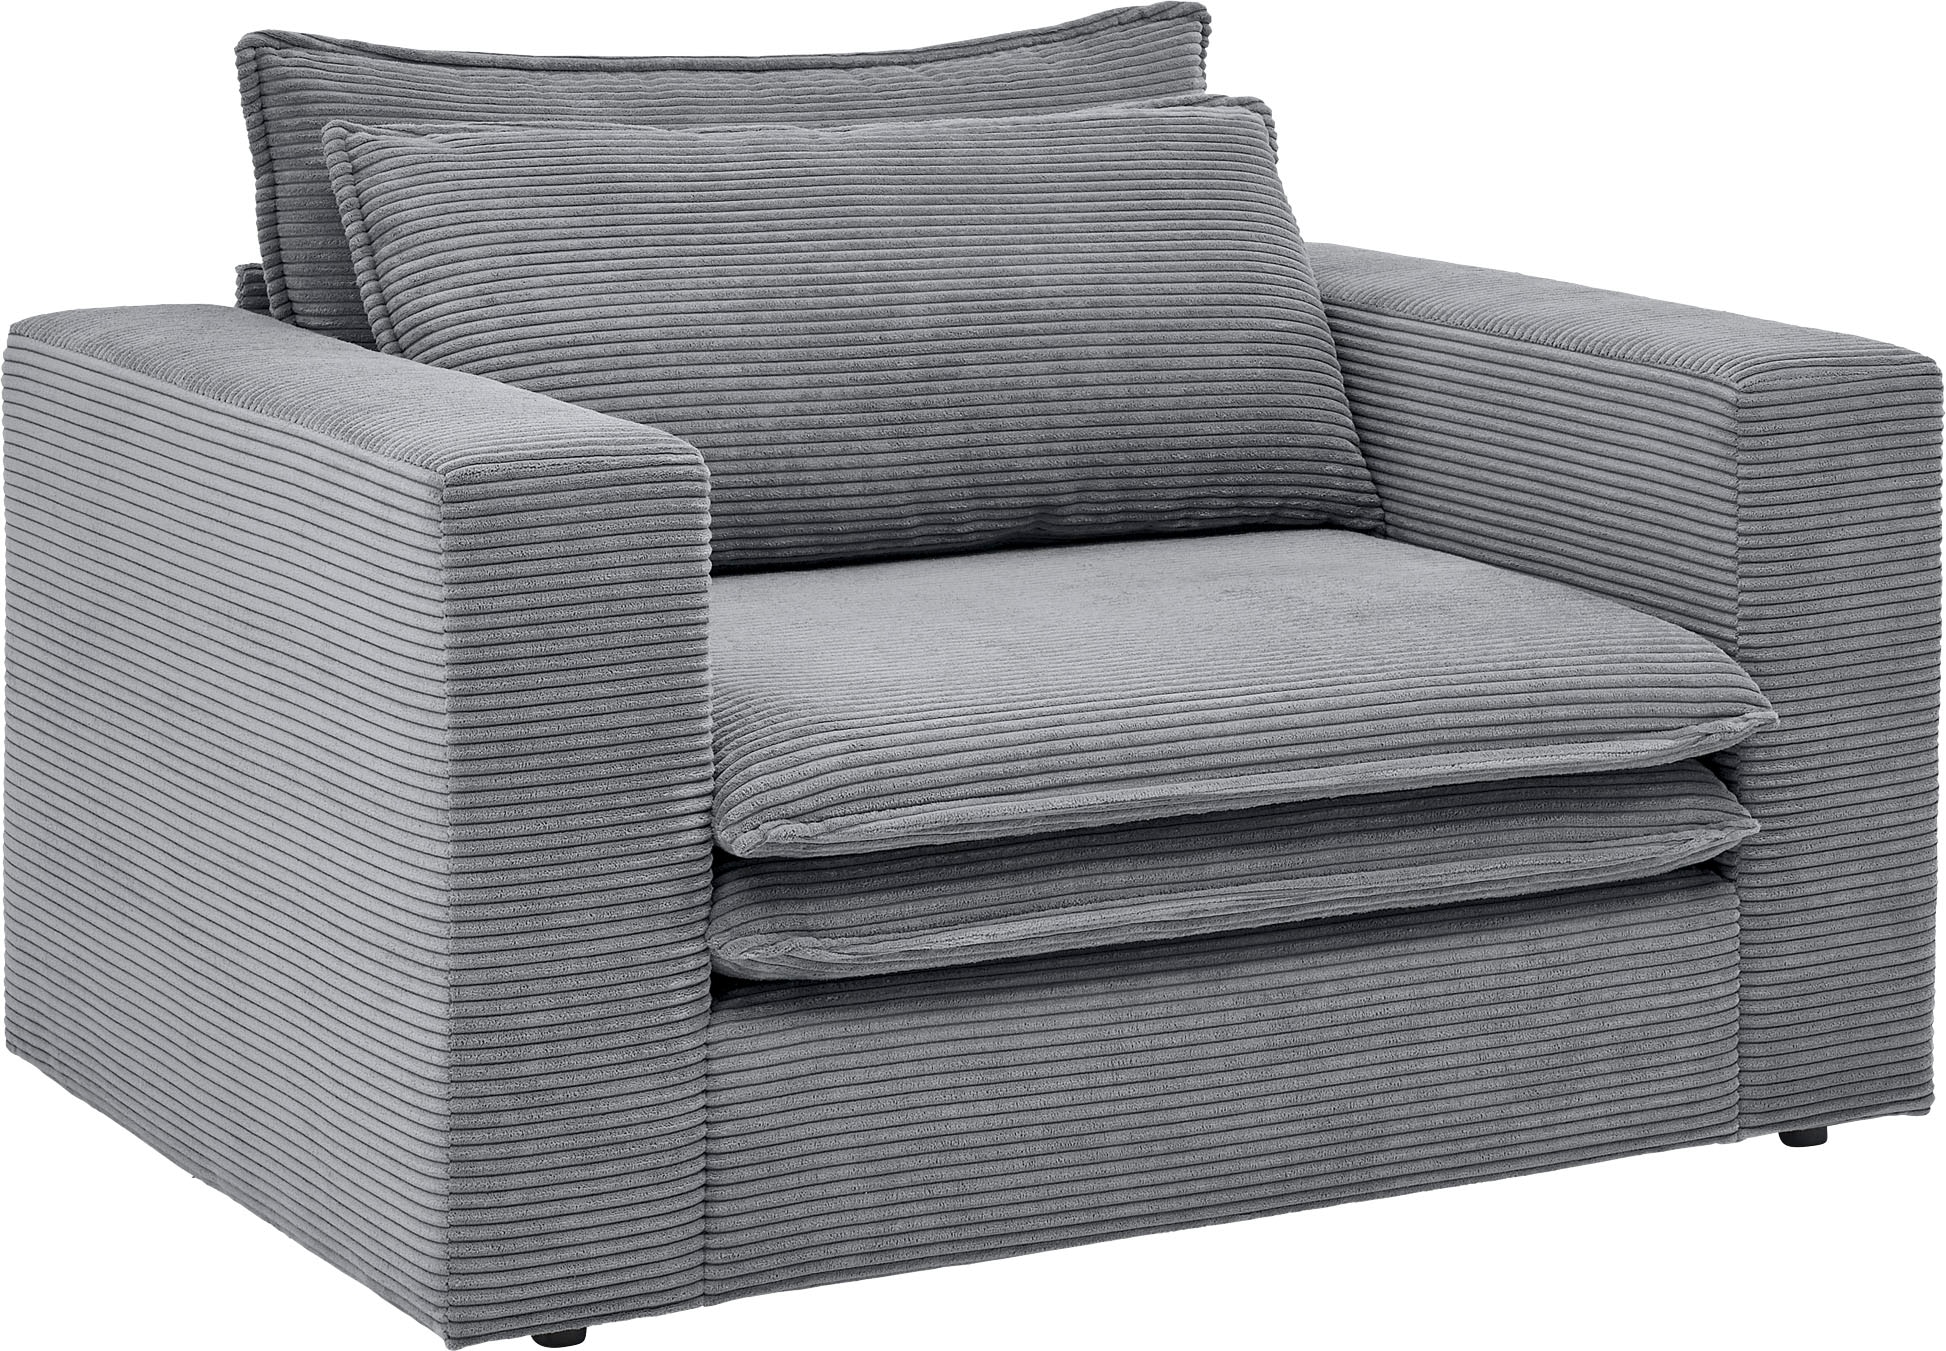 Places of Style Loveseat »PIAGGE«, OTTO Loveseat Cord, bei Hochwertiger trendiger